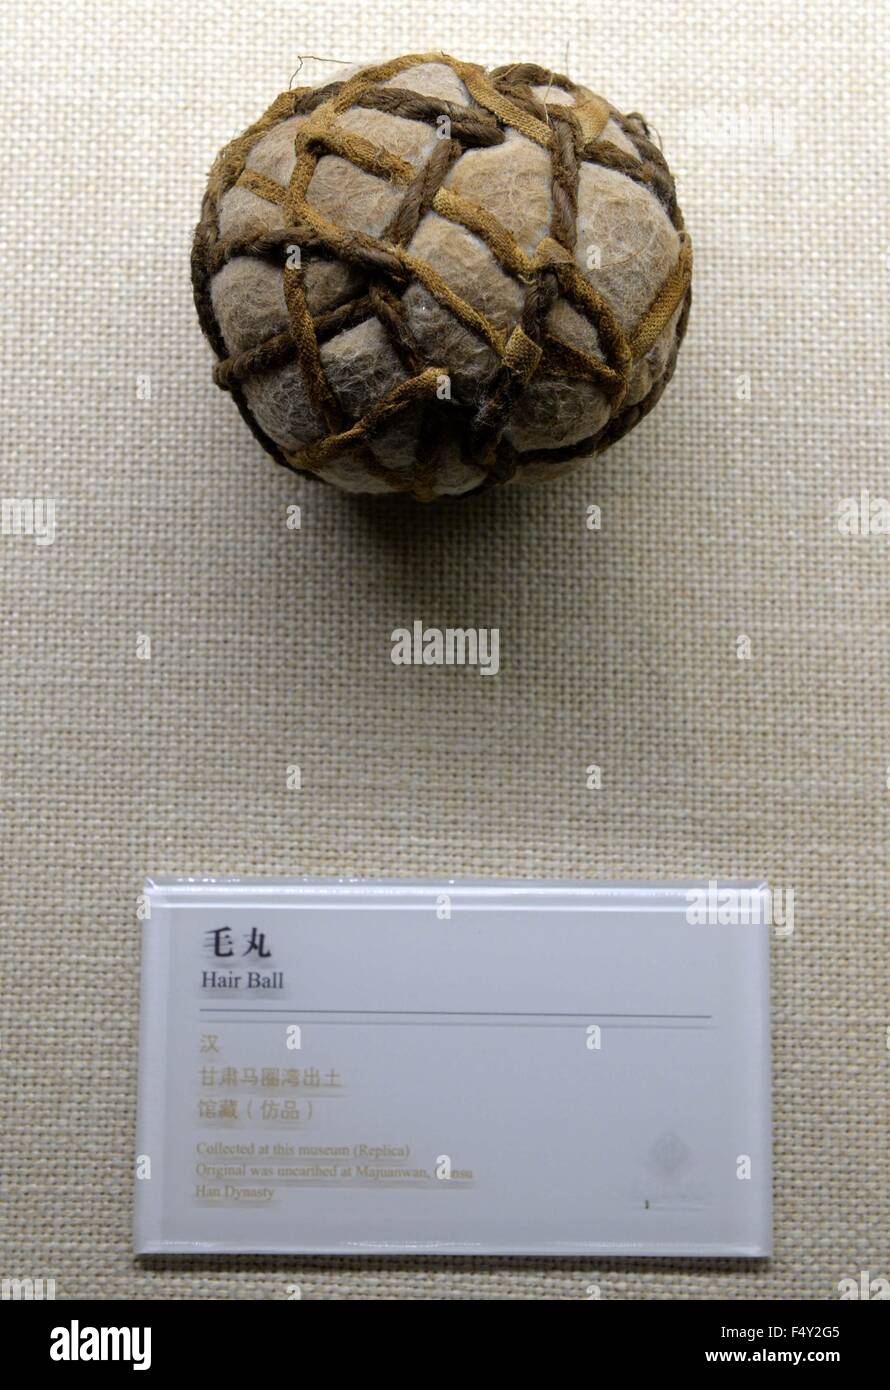 (151024) -- LINZI(SHANDONG), Oct. 24, 2015 (Xinhua) -- Photo taken on Oct. 23, 2015 shows the model of Hair Ball at Linzi Football Museum in east China's Shandong Province. China's Linzi Football Museum announced a partnership with the National Football Museum in Manchester, England on Friday. The two museums would work together to promote their shared objectives of communicating football culture to a world-wide audience. Linzi district, the birth place of Cuju, has been officially recognized by FIFA in 2004 as the origin of football. (Xinhua/Zhu Zheng) Stock Photo